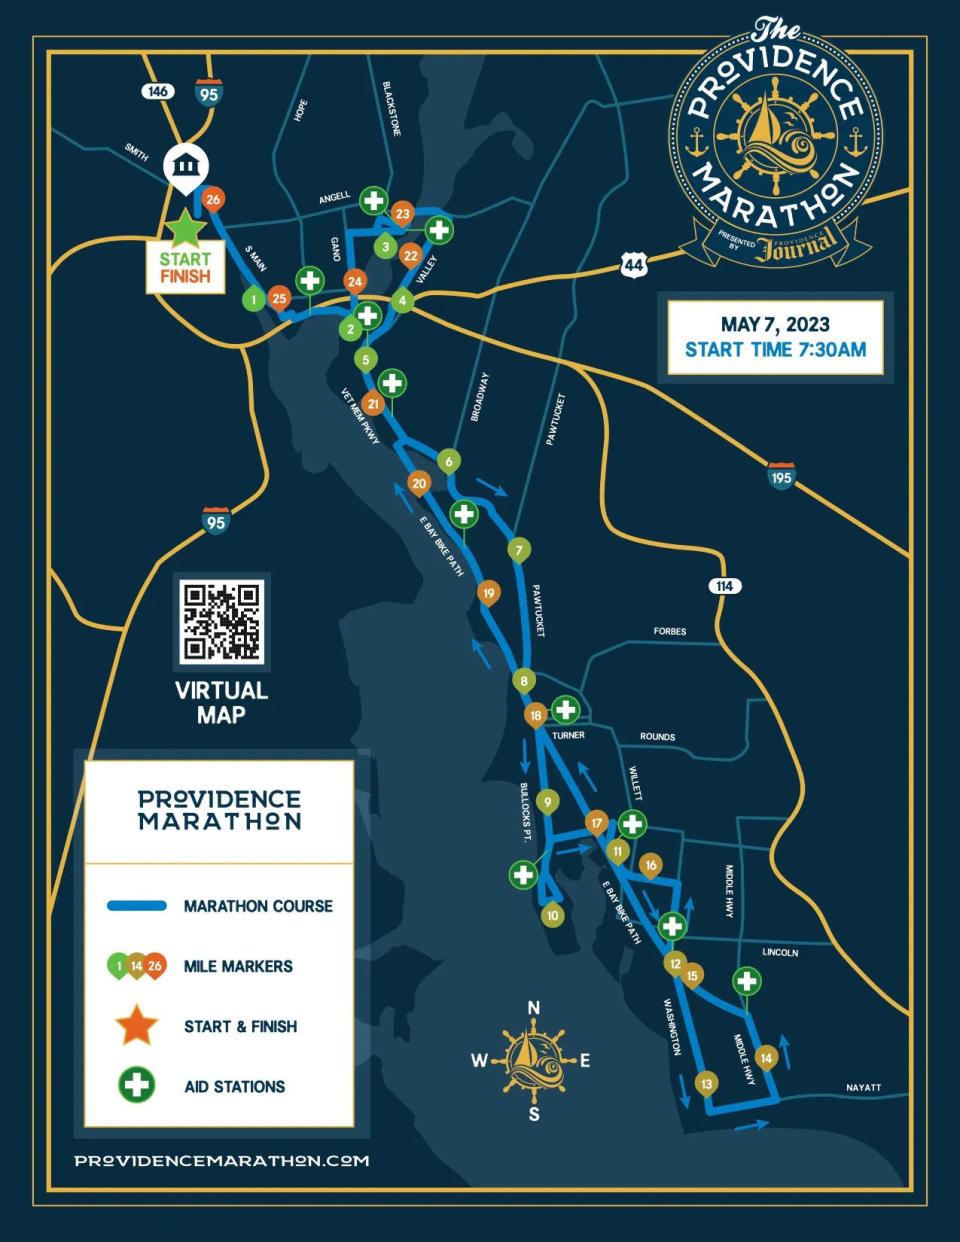 This map shows the Providence Marathon route.